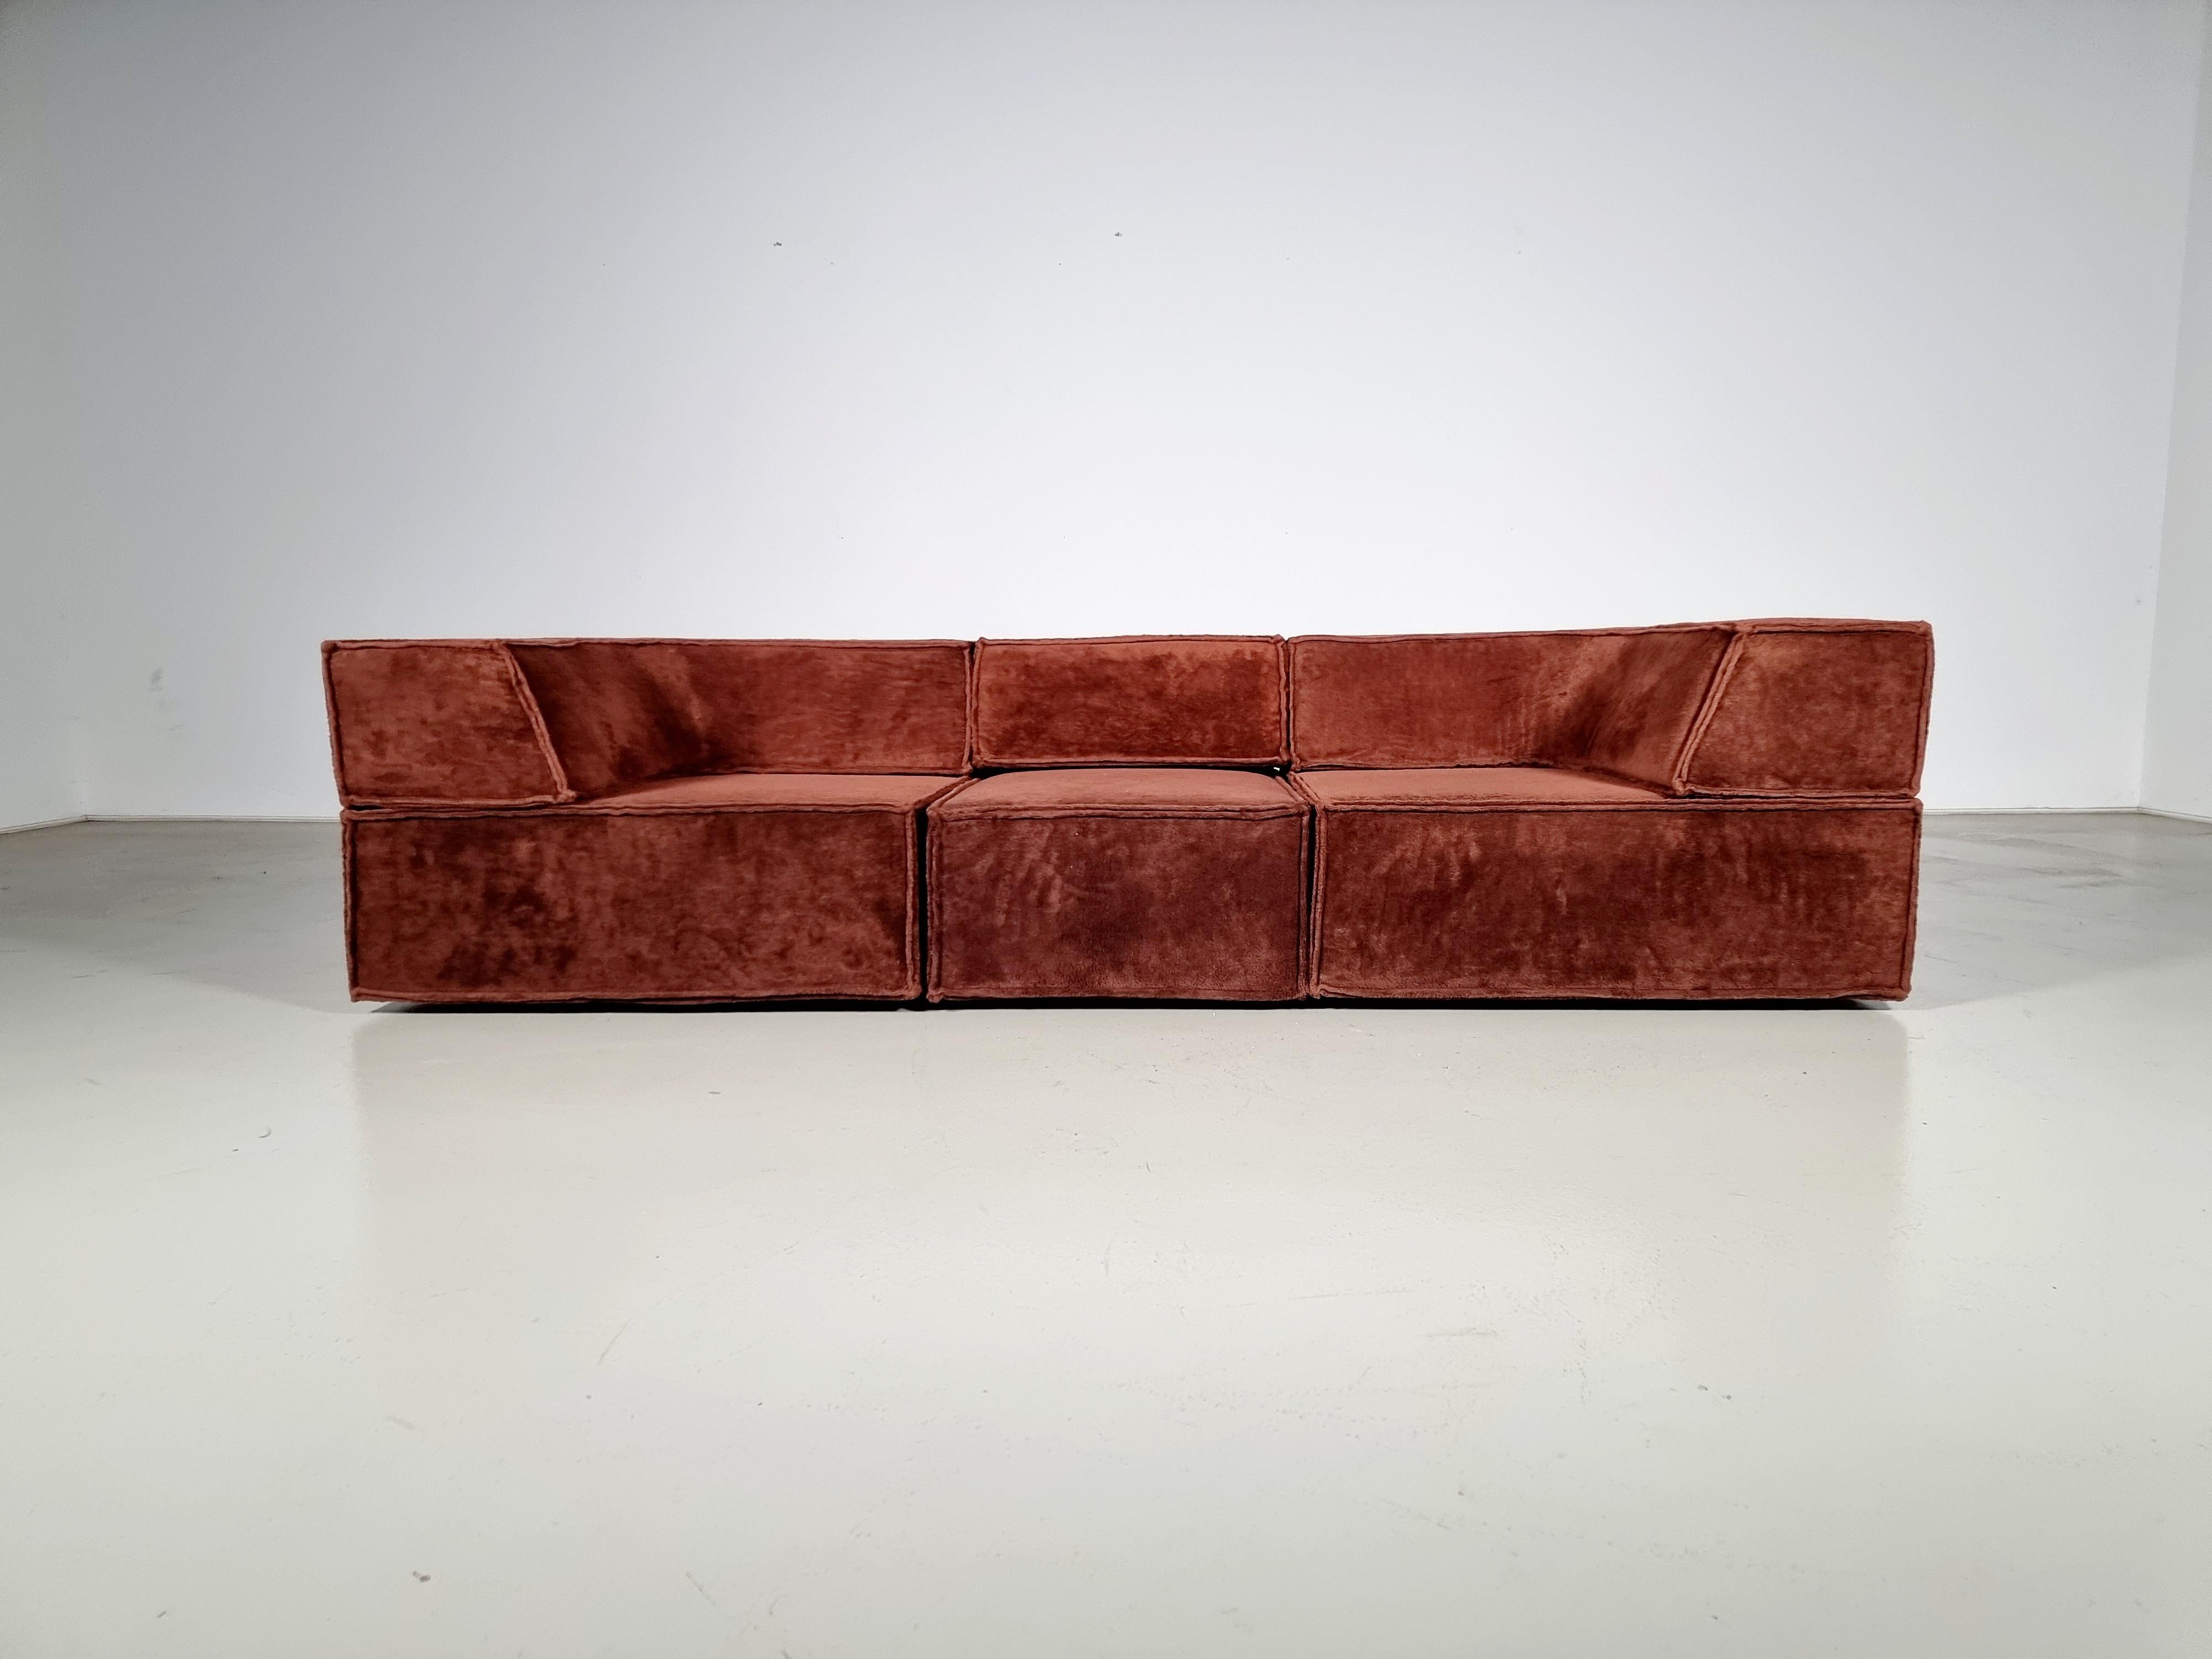 A very beautiful sofa designed by the Swiss Designers Group named Form AG and produced in the 1970s by COR, Germany. Many different kinds of variants are possible because of the modular and adjustable system of the sofa. In its original brown teddy